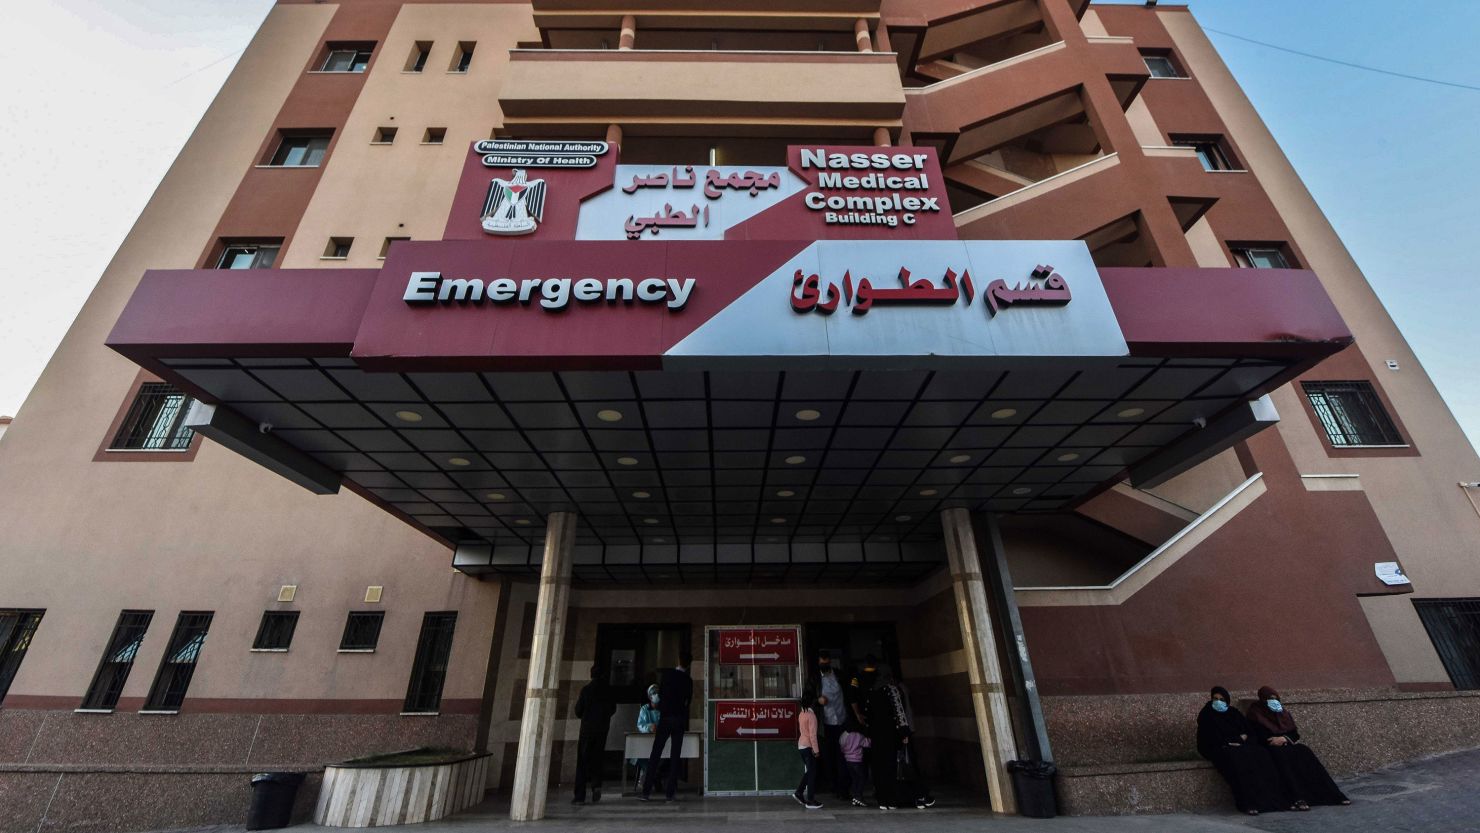 Nasser Medical Complex had been the largest functioning hospital in Gaza until last week.